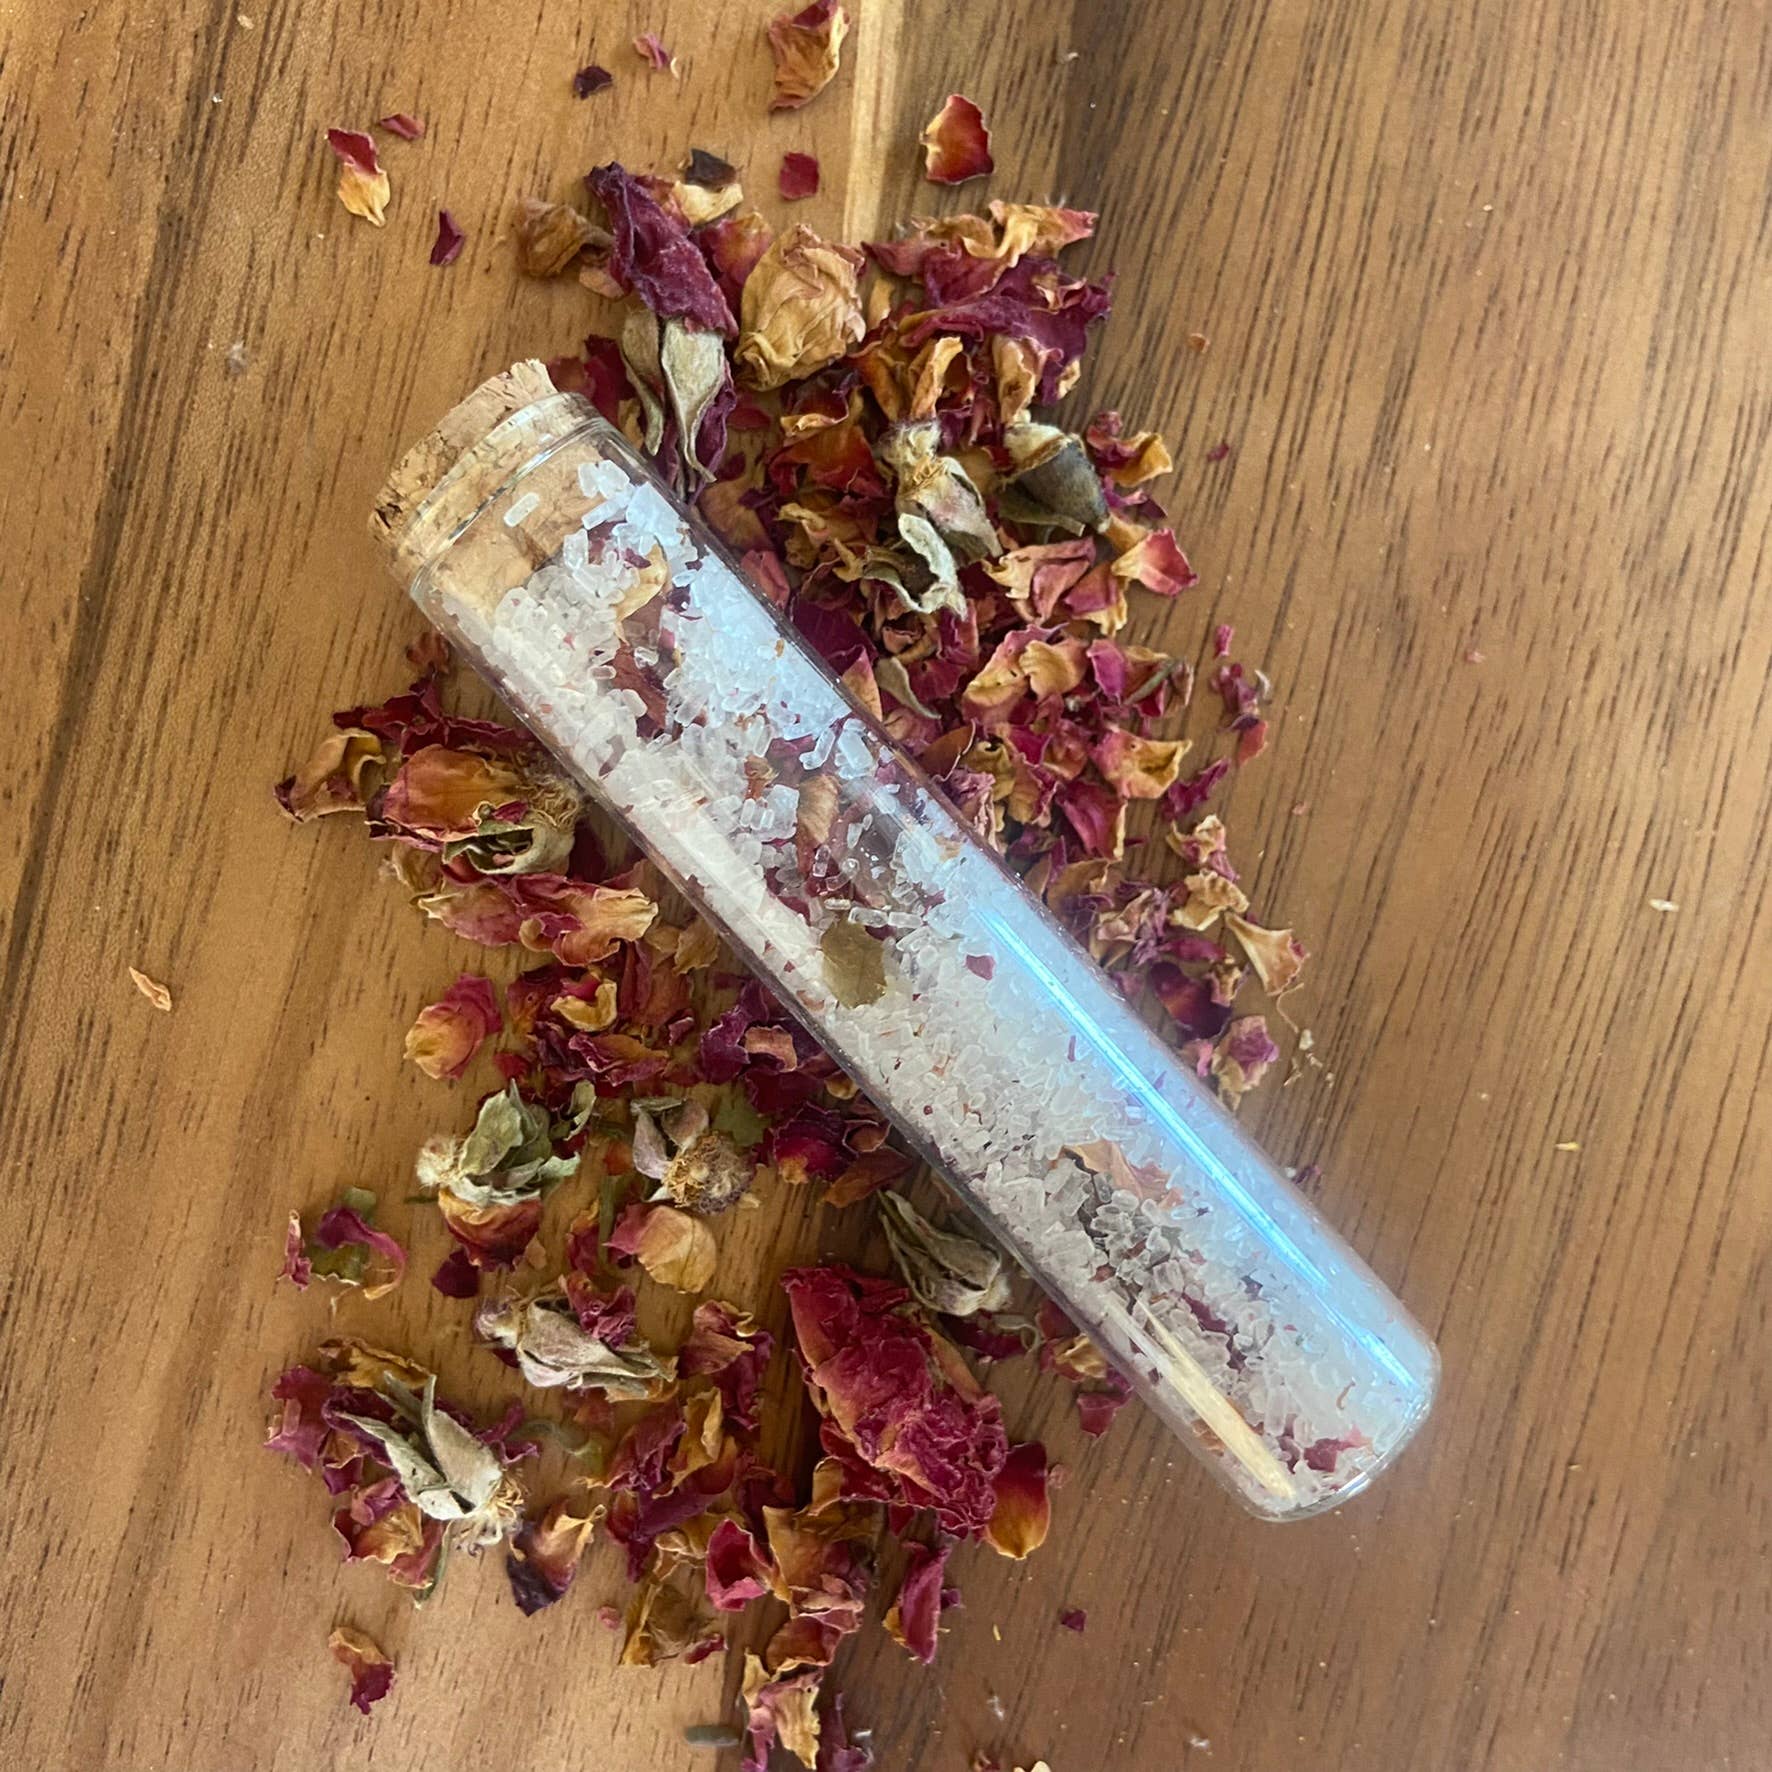 Herbal Bath Salts Test Tubes | Made With Dried Rose Petals - Storm and Sky Shoppe